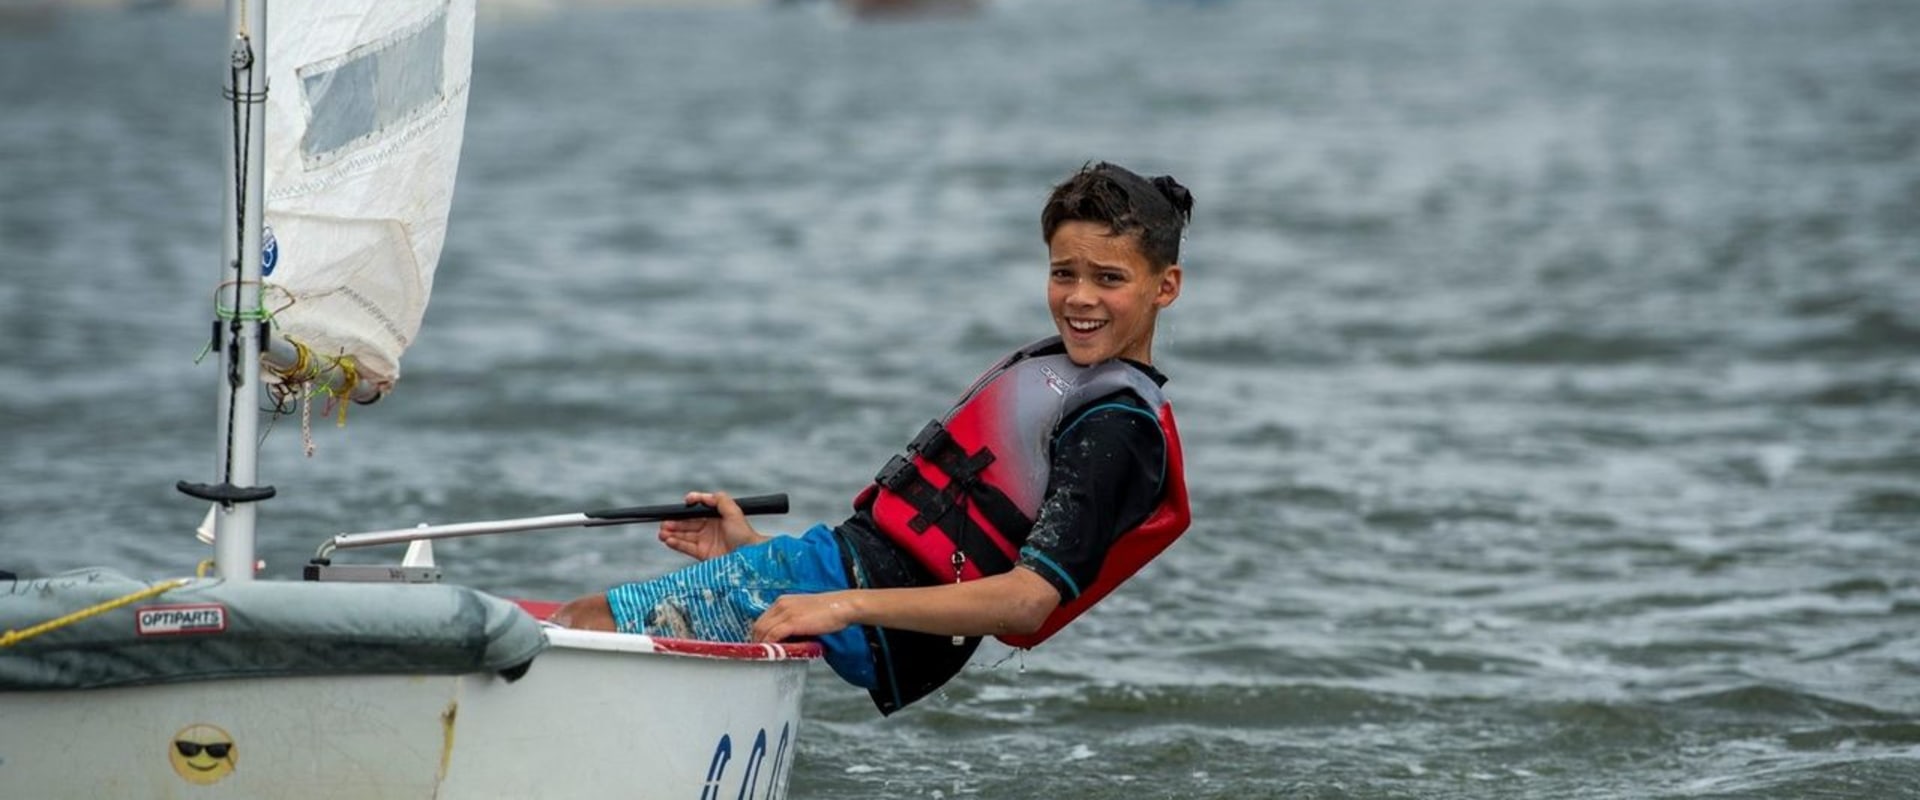 Discover the Benefits of Joining a Sailing Club in Southern California